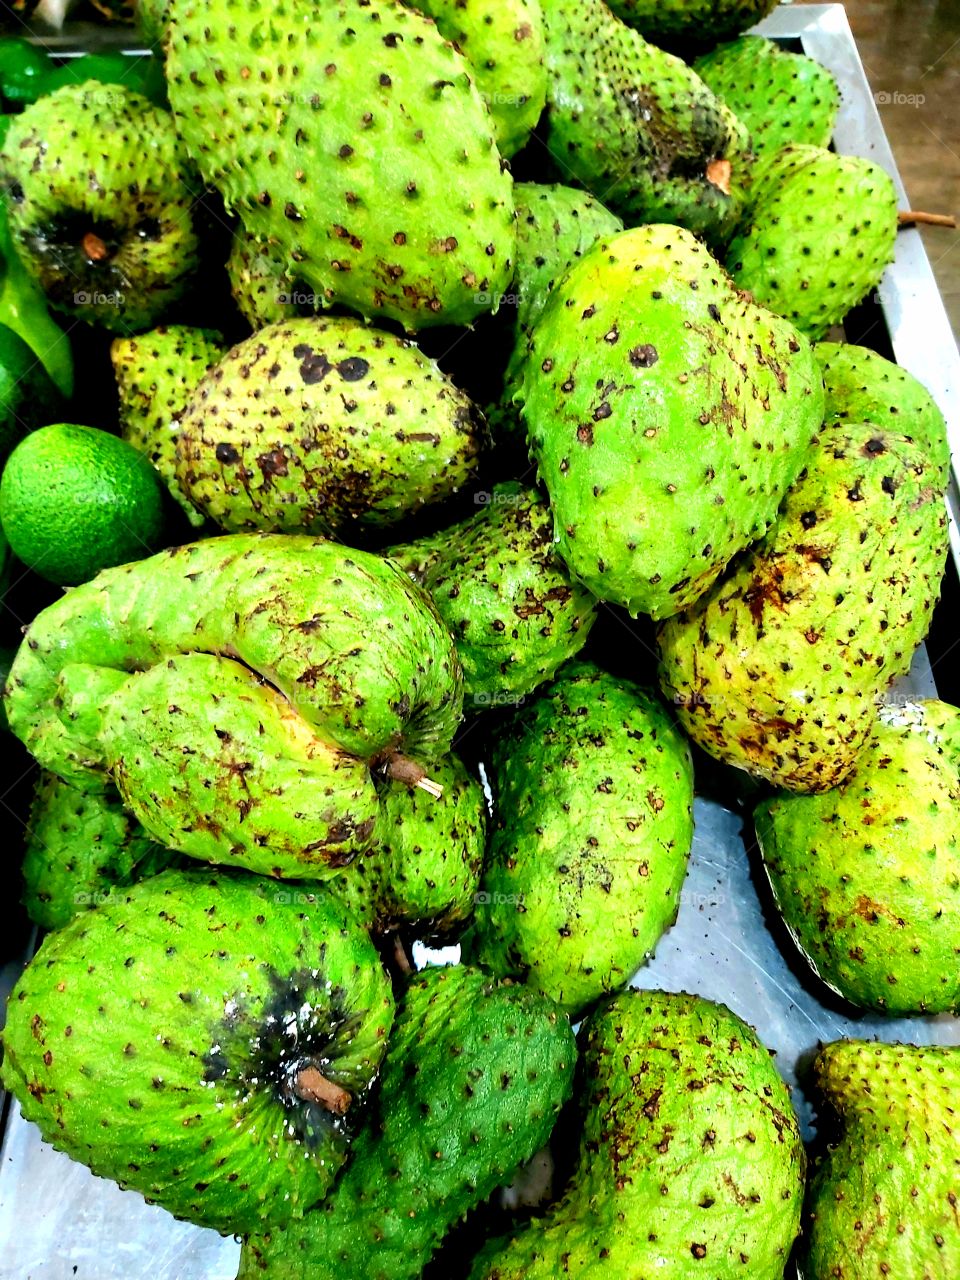 Annona muricata (common Spanish name: guanábana) is a species of the genus Annona of the custard apple tree family, Annonaceae, which has edible fruit. The fruit is usually called soursop due to its slightly acidic taste when ripe. Best anti oxidant.